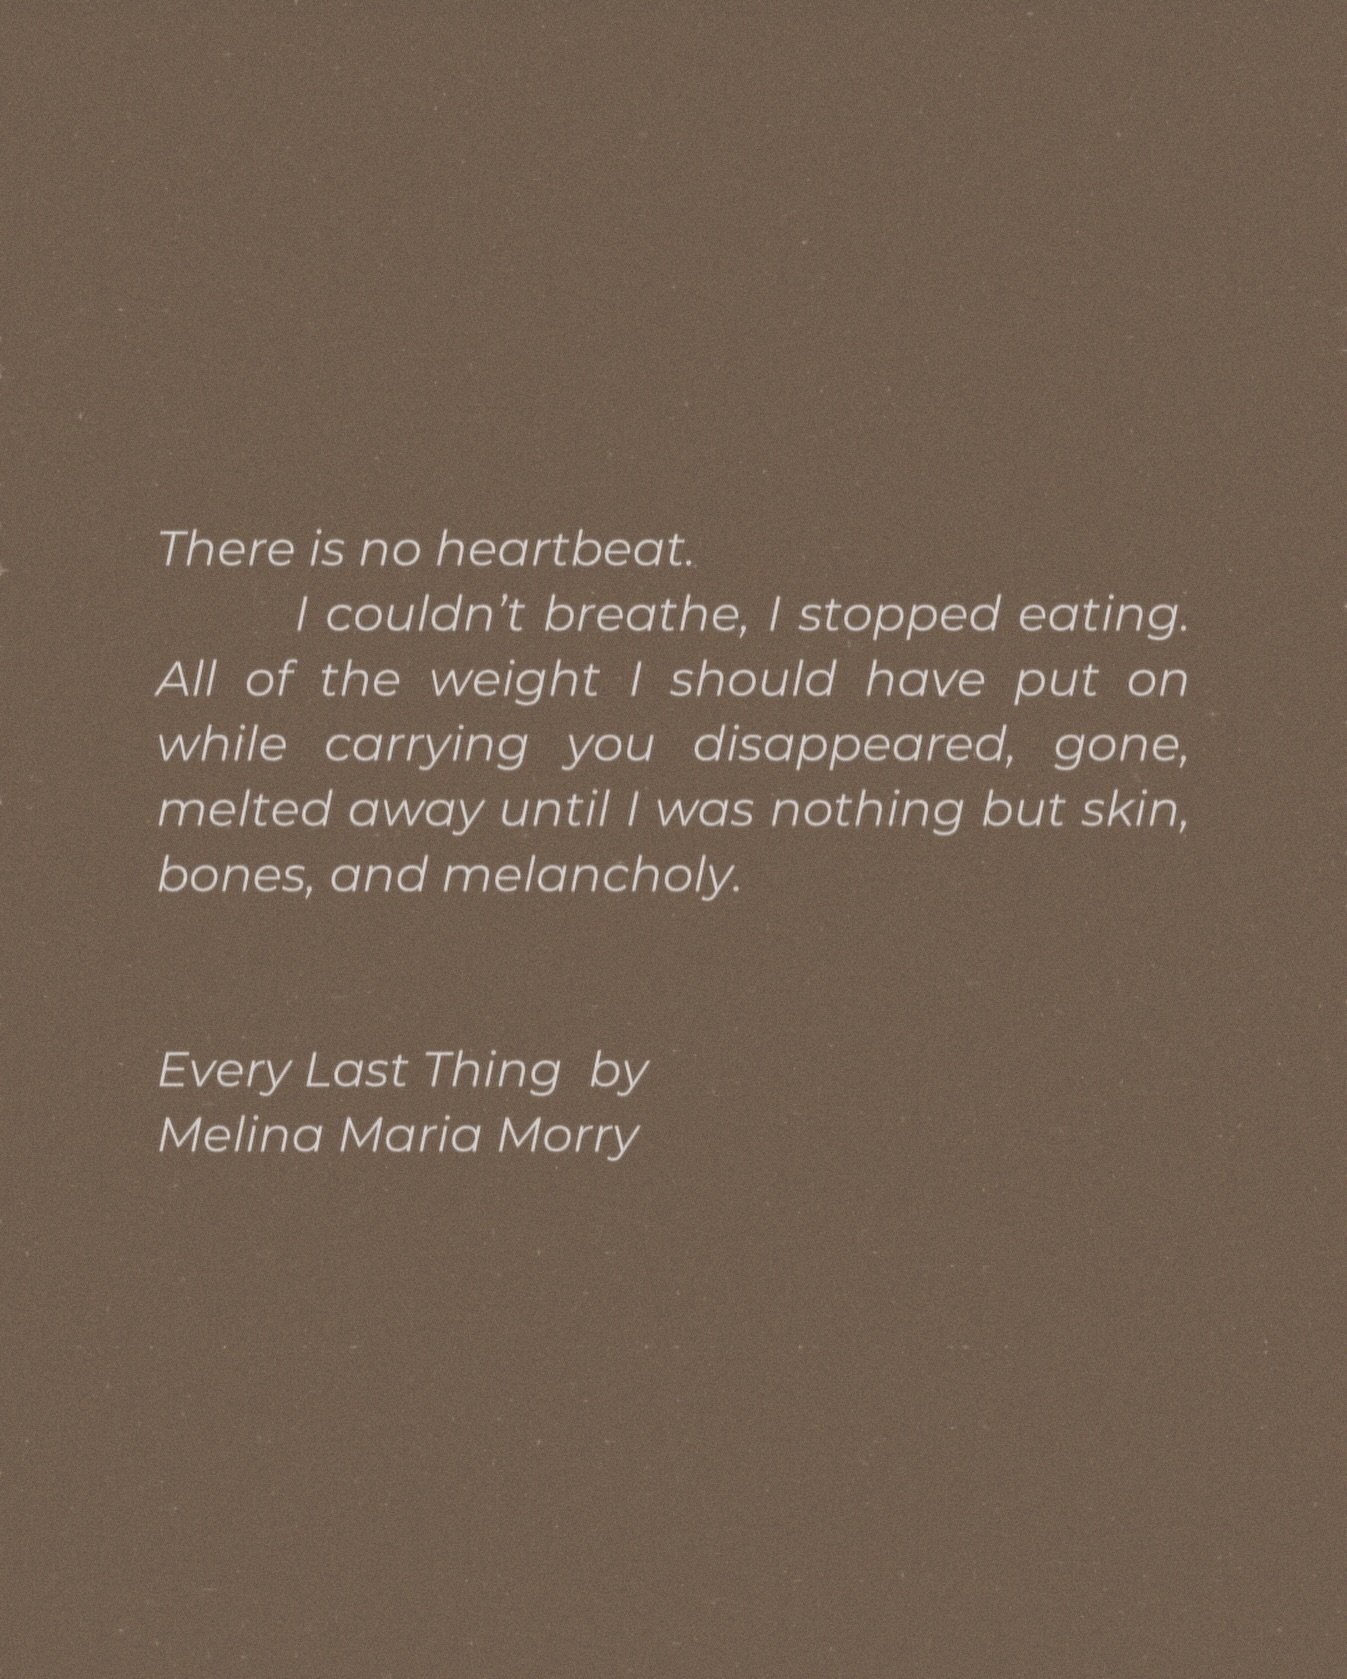 A few lines from &ldquo;Every Last Thing&rdquo;&mdash;one of three brand-new stories I wrote for my #shortstory collection called Thirteen Emotions 🥀 It&rsquo;ll be heartbreaking, hysterical, hard to get enough of and perfect for a quick flight on a